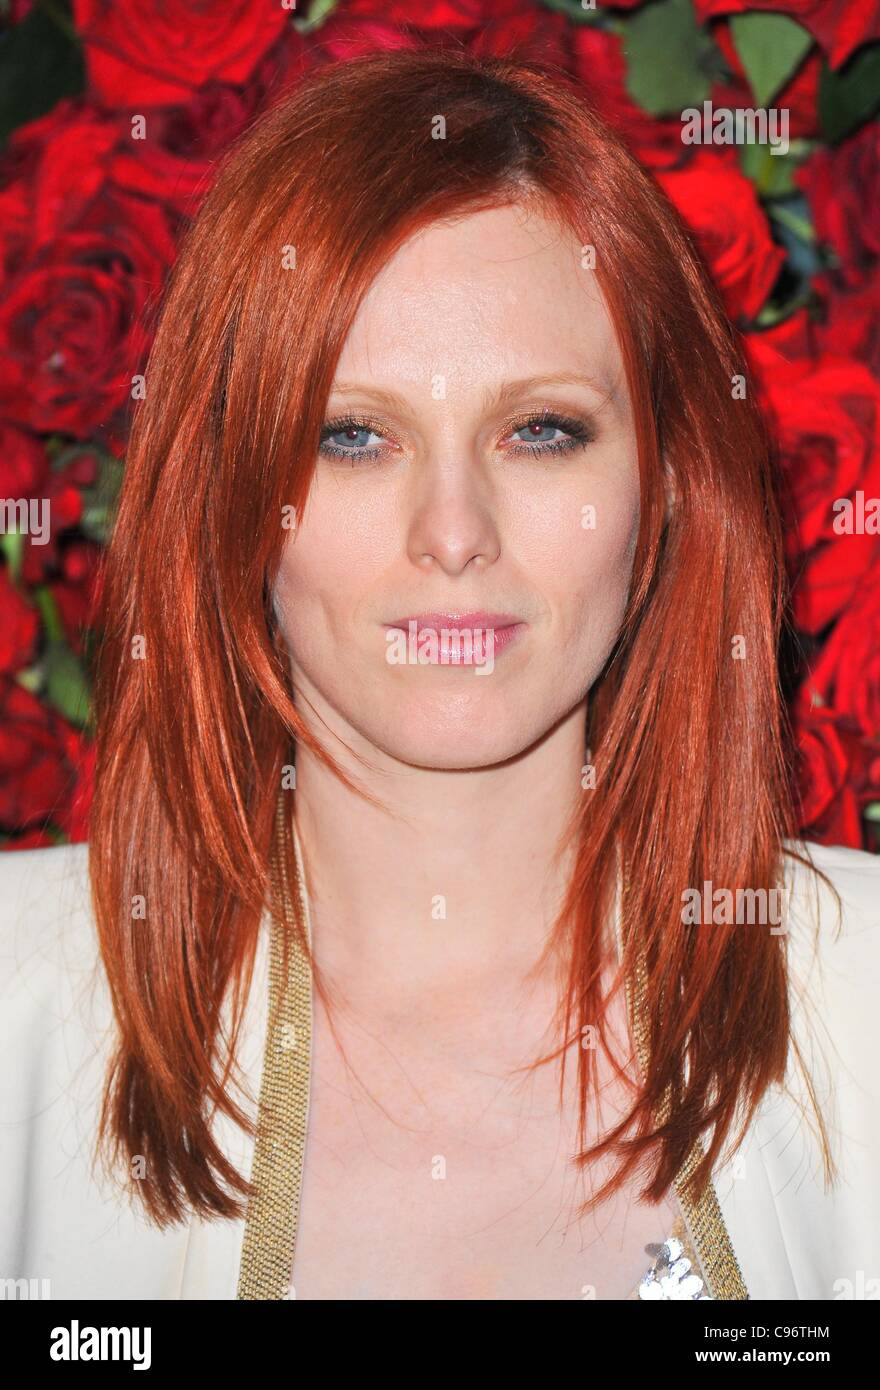 Karen Elson at arrivals for MoMA's 4th Annual Film Benefit to Honor Pedro Almodovar, MoMA Museum of Modern Art, New York, NY November 15, 2011. Photo By: Gregorio T. Binuya/Everett Collection Stock Photo